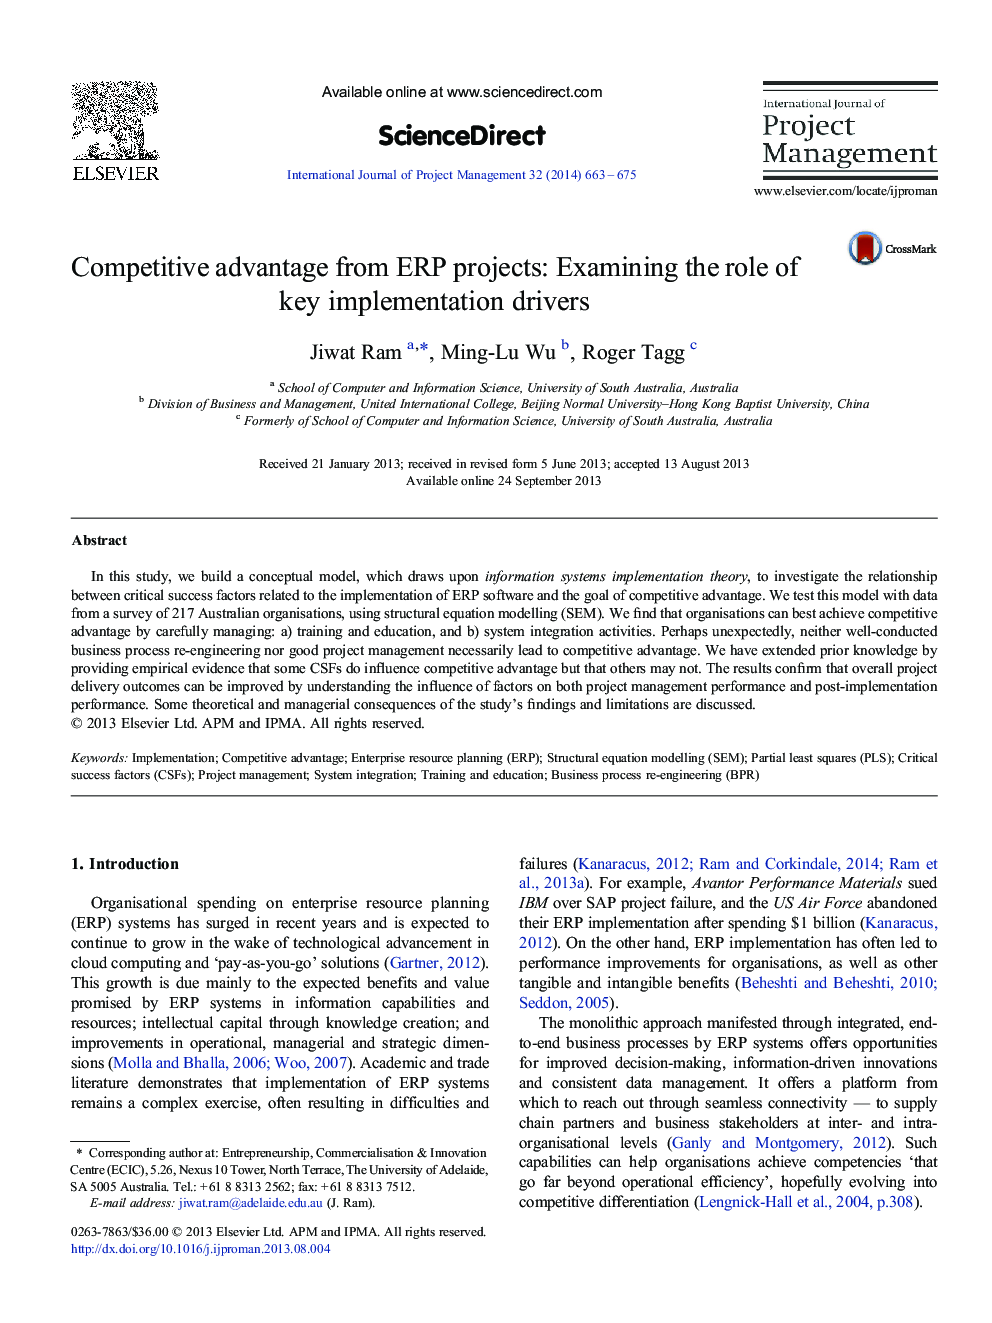 Competitive advantage from ERP projects: Examining the role of key implementation drivers